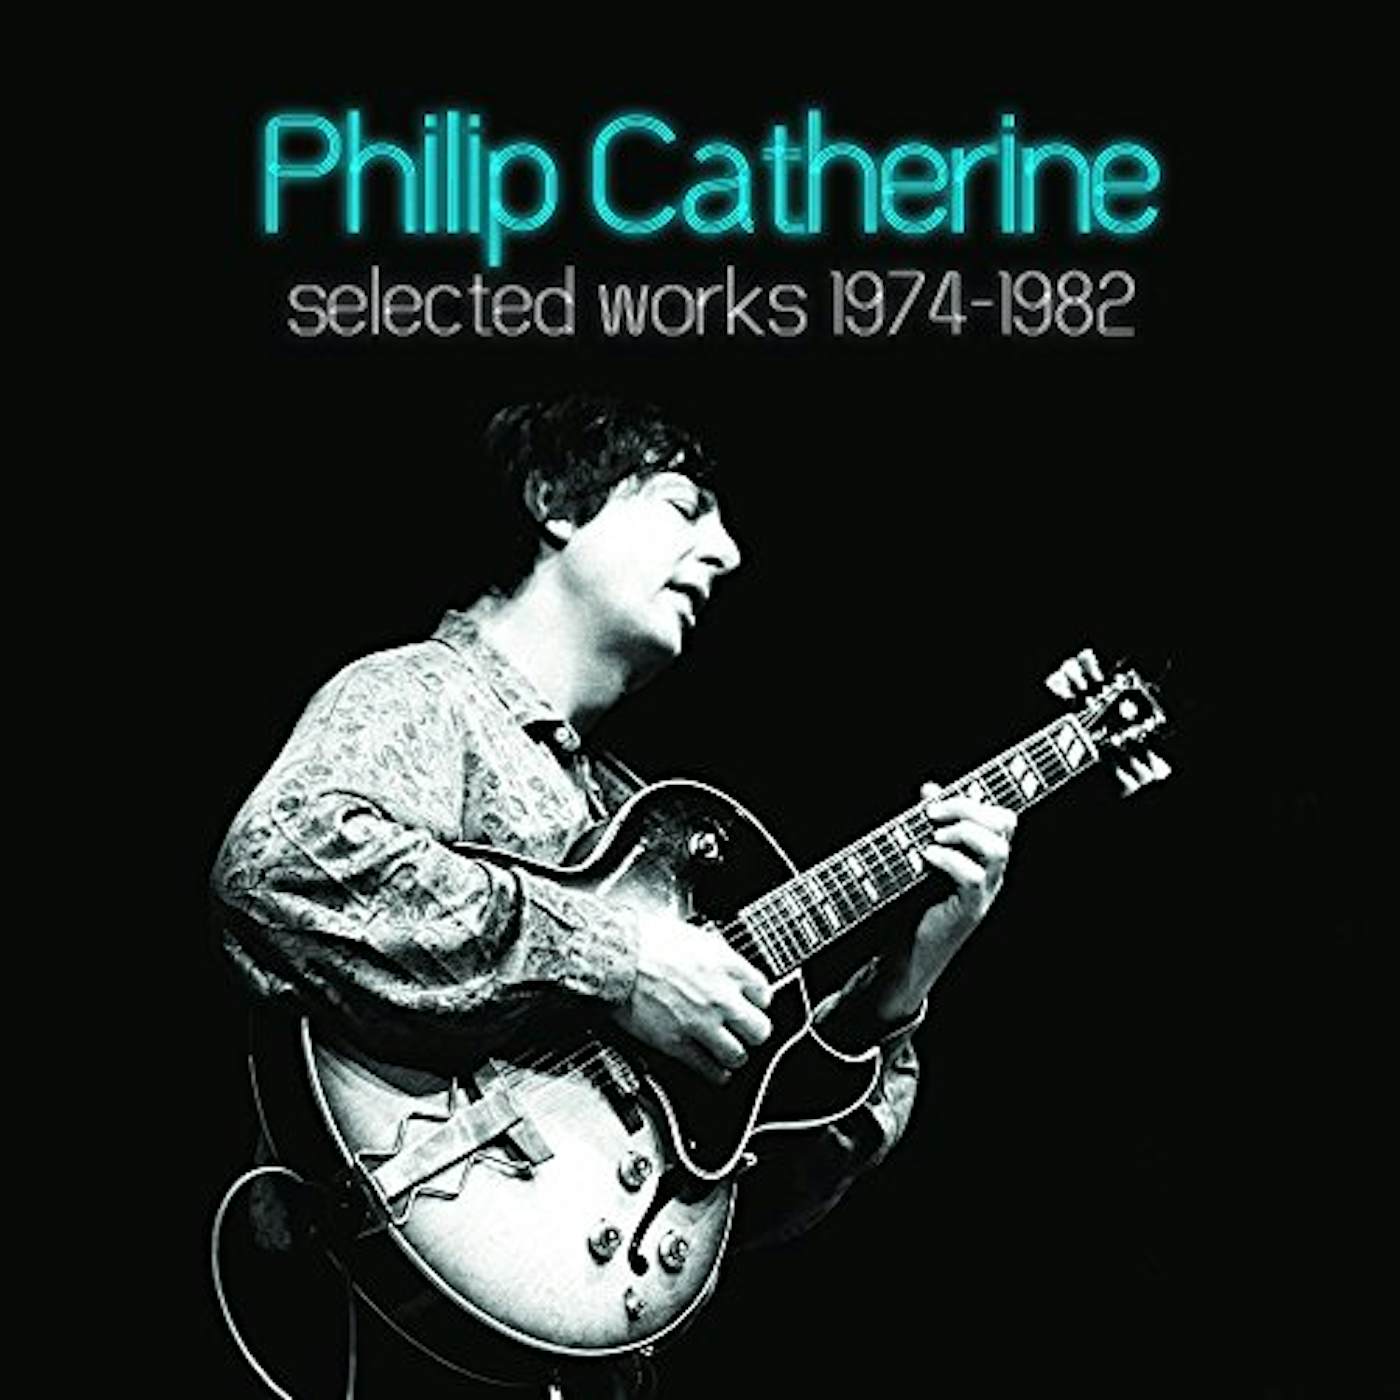 Philip Catherine SELECTED WORKS 1974-1982 CD